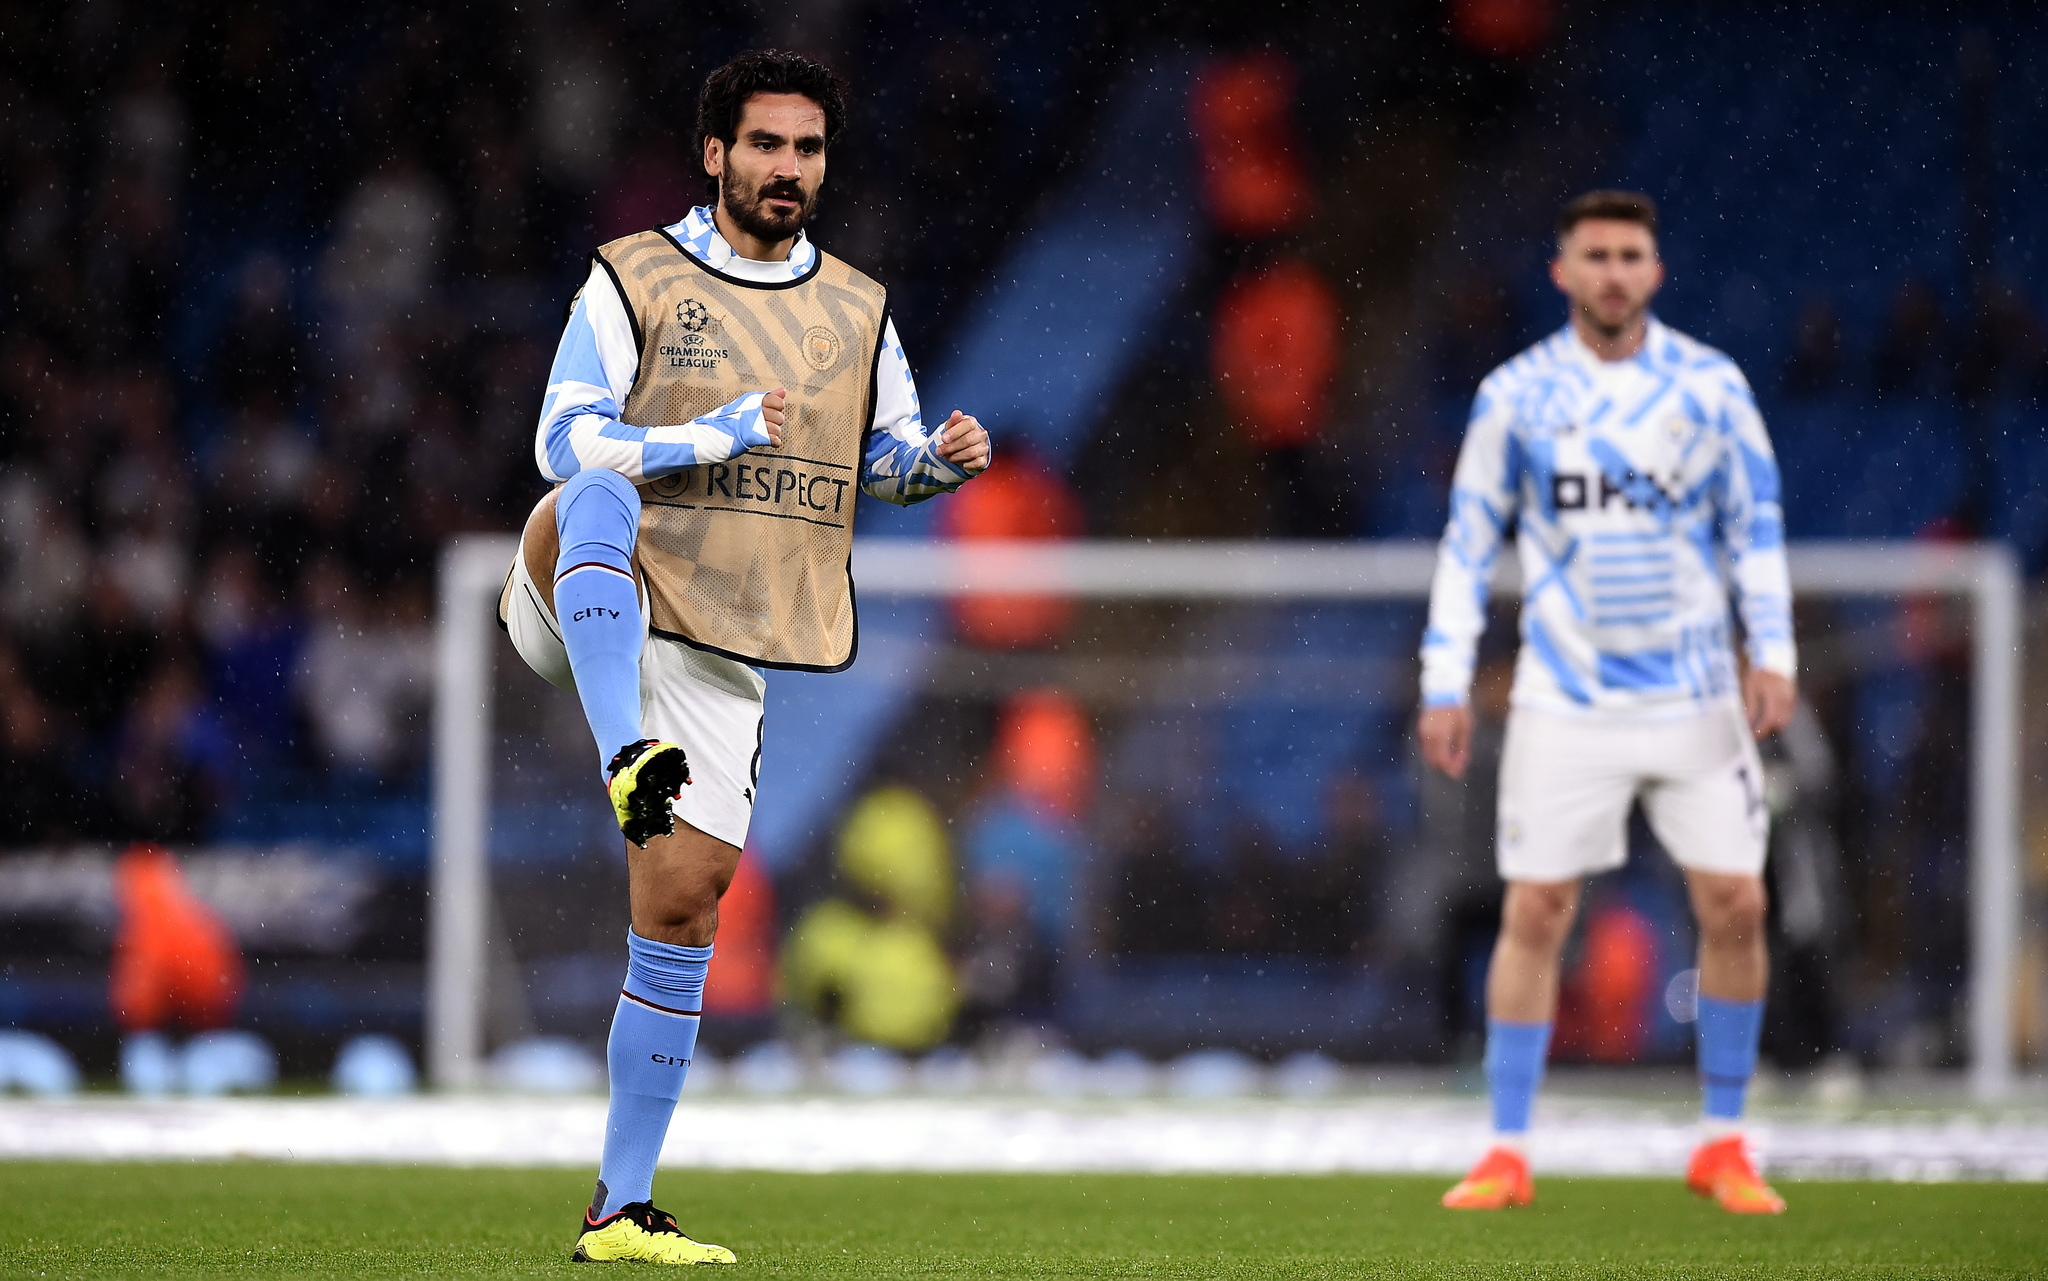  lt;HIT gt;Manchester lt;/HIT gt; (United Kingdom), 05/10/2022.- Ilkay Gundogan of  lt;HIT gt;Manchester lt;/HIT gt;  lt;HIT gt;City lt;/HIT gt; during the warm-up before the UEFA Champions League group G soccer match between  lt;HIT gt;Manchester lt;/HIT gt;  lt;HIT gt;City lt;/HIT gt; and FC Copenhagen in  lt;HIT gt;Manchester lt;/HIT gt;, Britain, 05 October 2022. (Liga de Campeones, Reino Unido, Copenhague) EFE/EPA/PETER POWELL